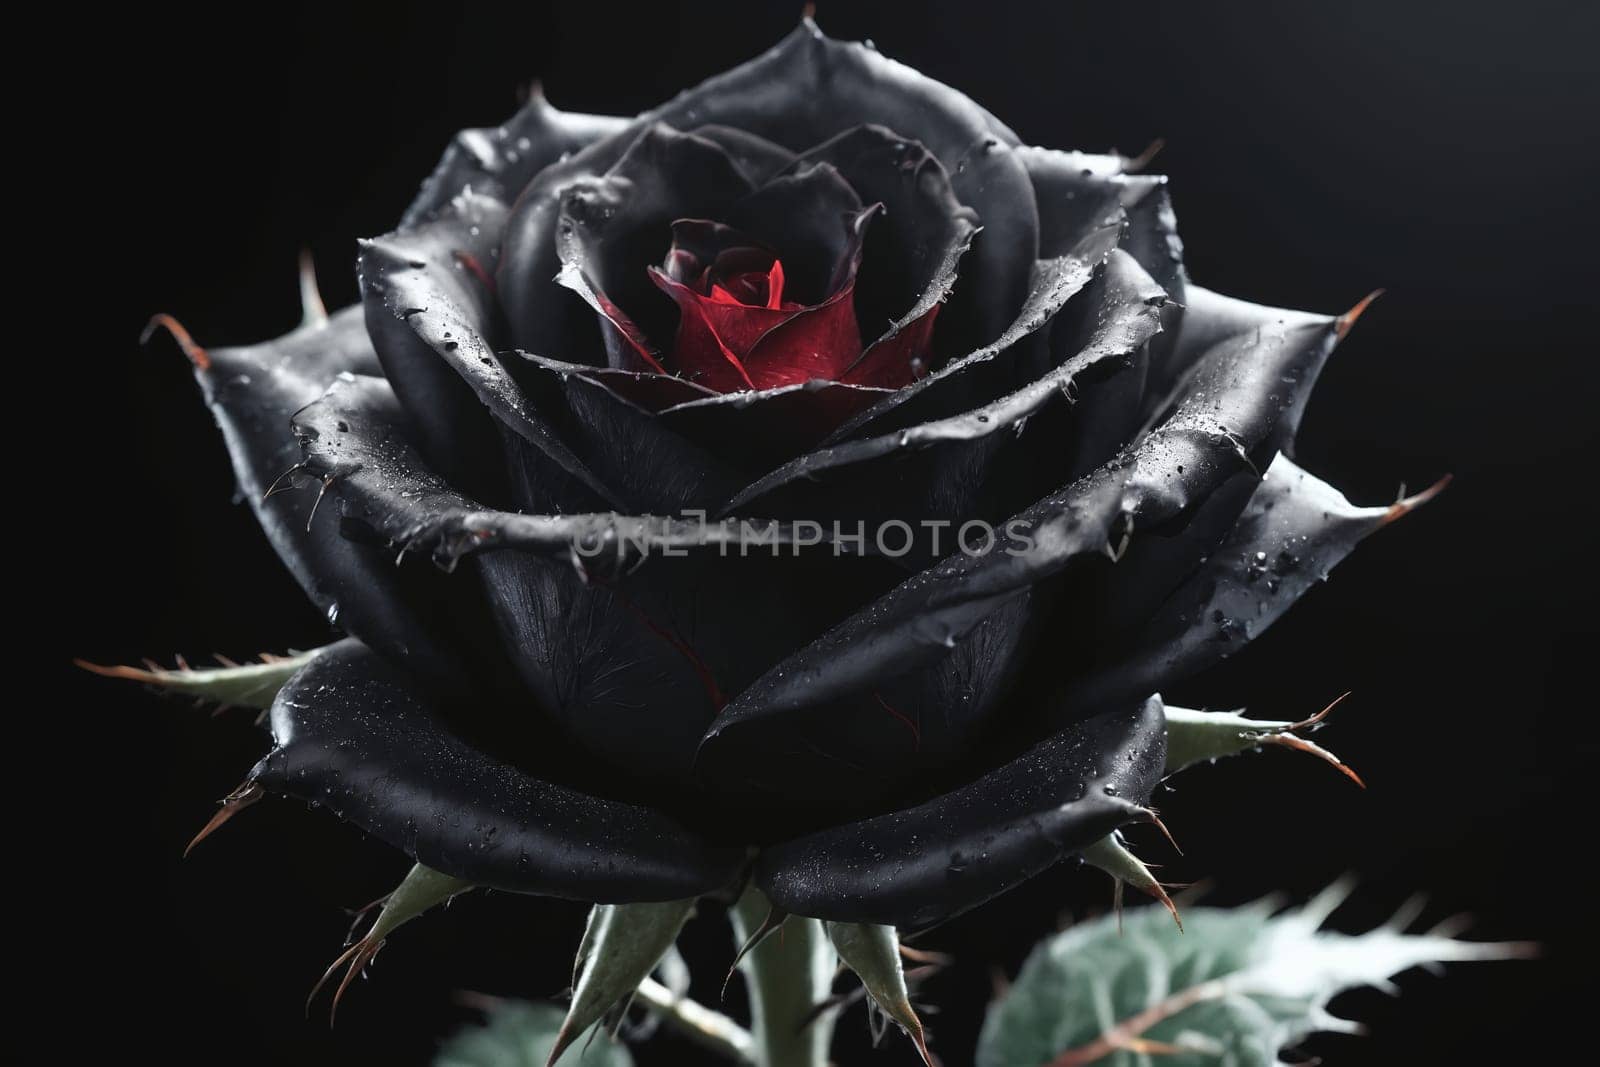 The Dark Belle: A Rain-Kissed Rose with Dramatic Black Petals and a Red Core by Andre1ns